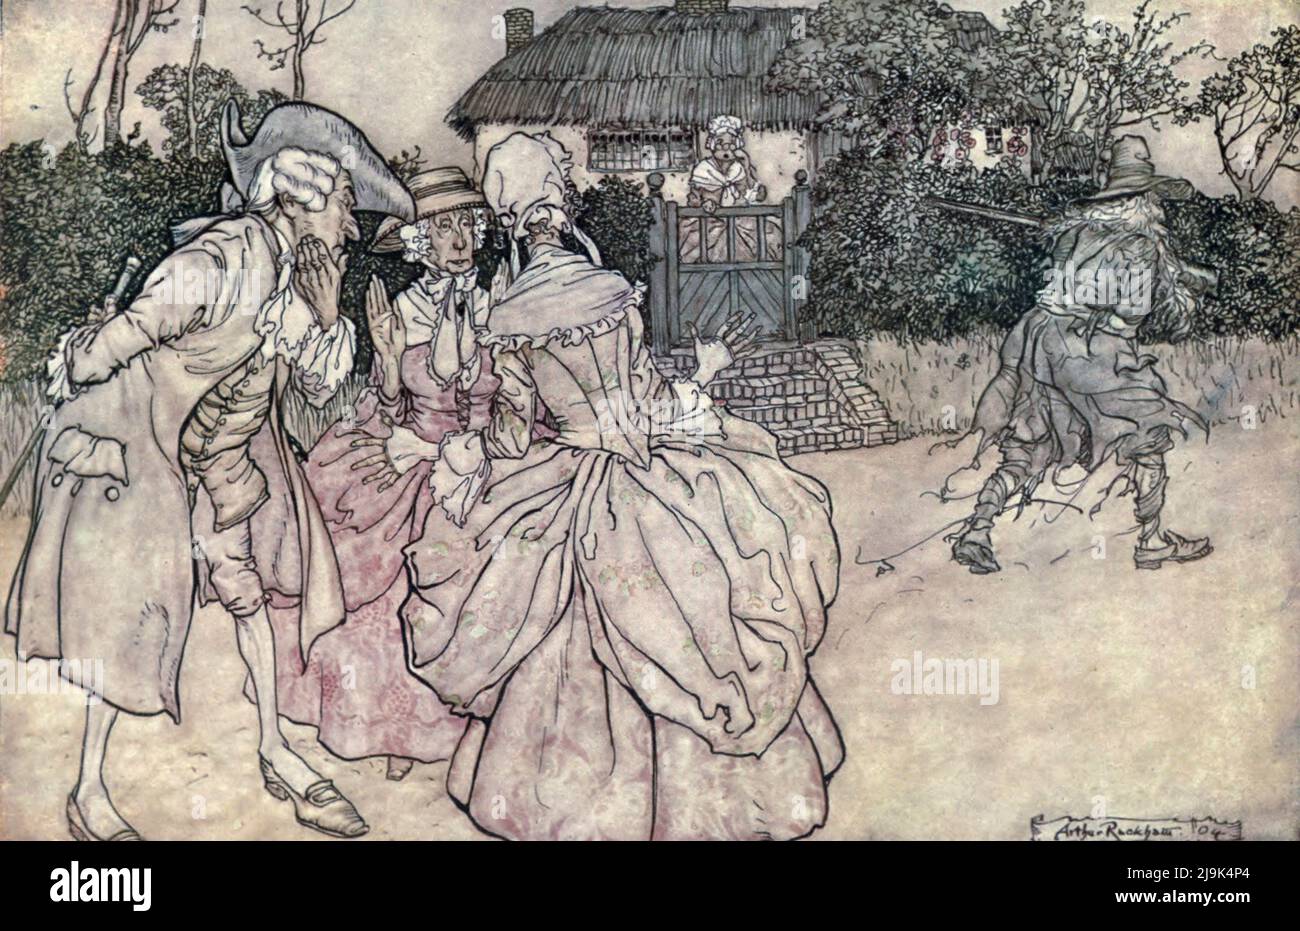 They all stared at him with equal marks of surprise and invariably stroked their chins from the book ' Rip Van Winkle ' by Washington Irving, 1783-1859; Illustrated by Arthur Rackham, 1867-1939 Publication date 1919  Publisher New York Doubleday, Page 'Rip Van Winkle' is a short story by the American author Washington Irving, first published in 1819. It follows a Dutch-American villager in colonial America named Rip Van Winkle who meets mysterious Dutchmen, imbibes their liquor and falls asleep in the Catskill Mountains. He awakes 20 years later to a very changed world, having missed the Ameri Stock Photo